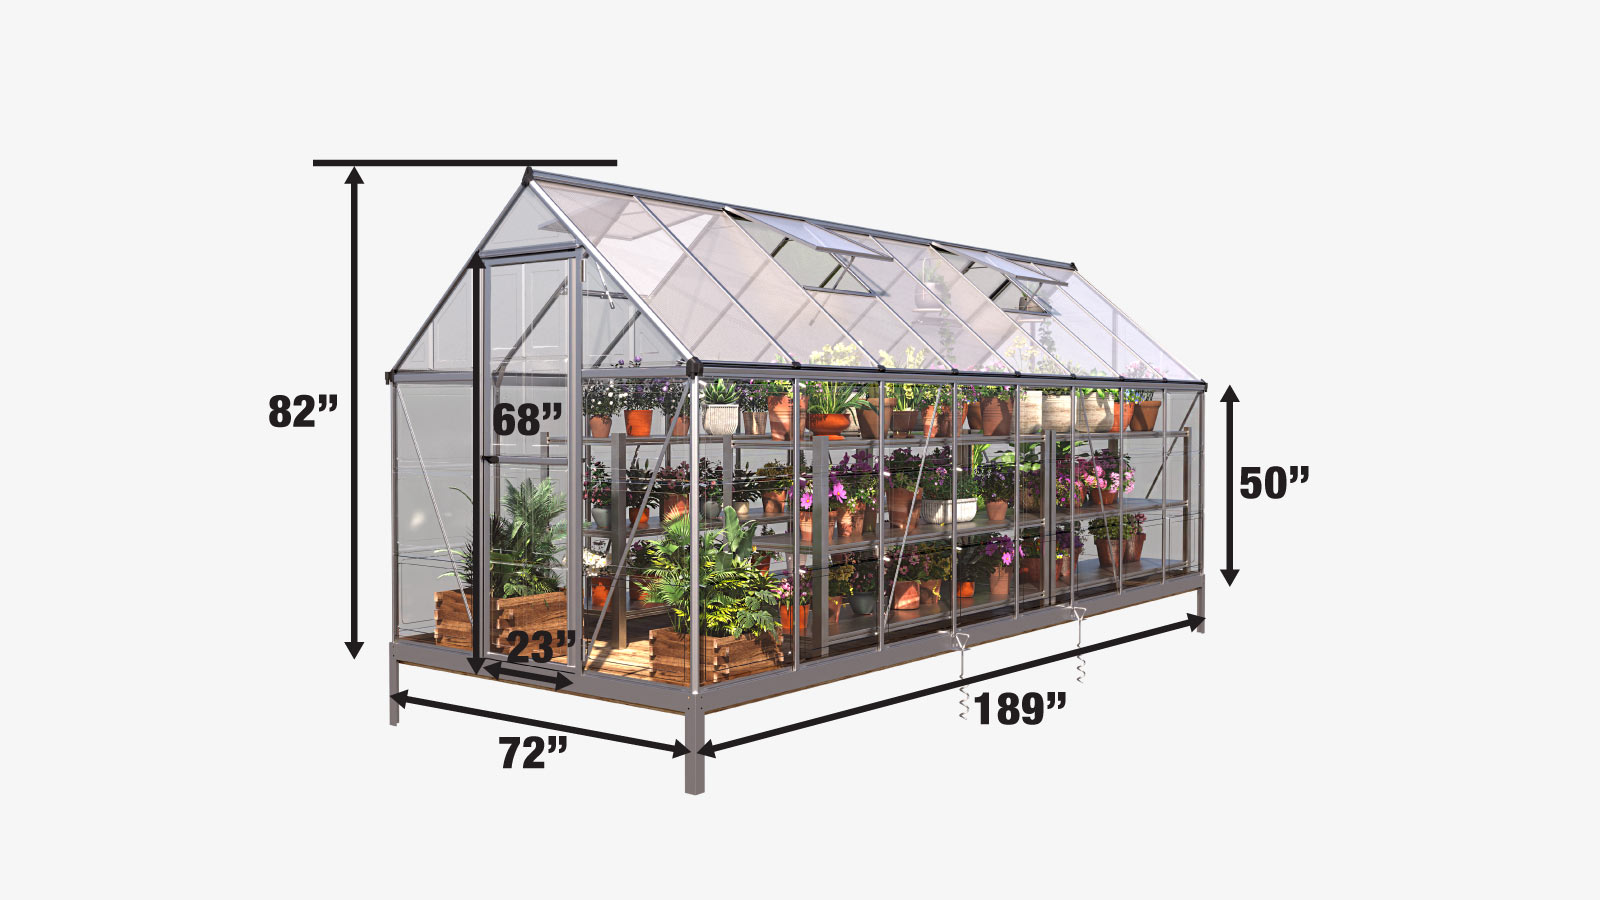 TMG Industrial 6’ x 16’ Crystal Clear Greenhouse, Aluminum Frame, Integrated Gutter System, Roof Vents, TMG-GH616-specifications-image